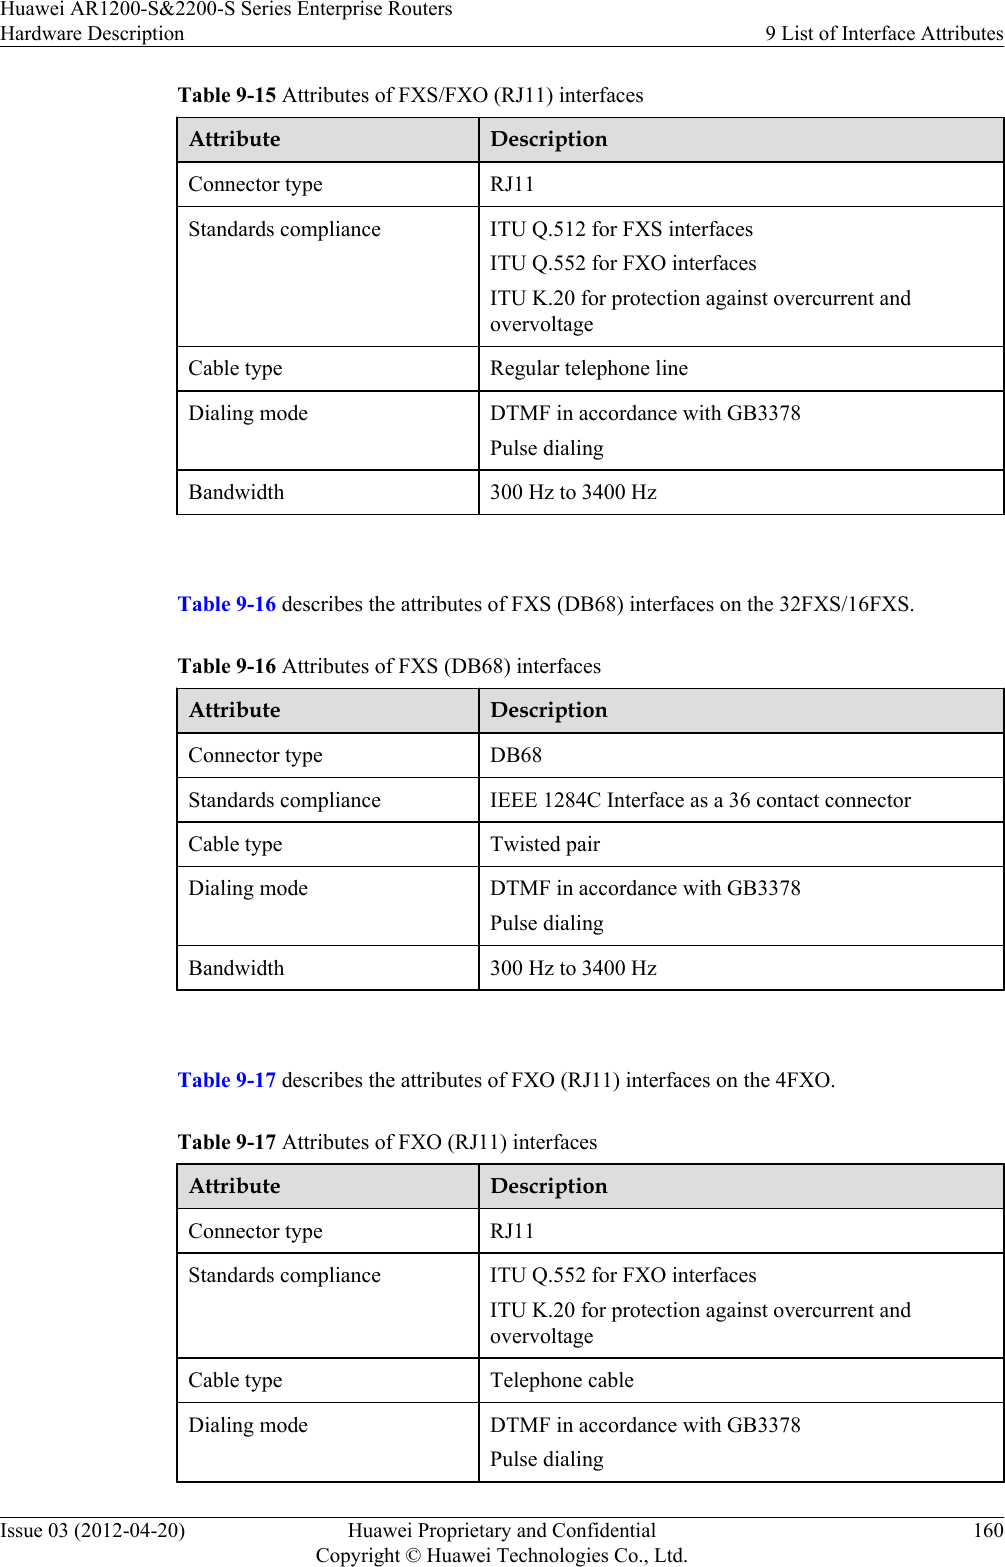 Table 9-15 Attributes of FXS/FXO (RJ11) interfacesAttribute DescriptionConnector type RJ11Standards compliance ITU Q.512 for FXS interfacesITU Q.552 for FXO interfacesITU K.20 for protection against overcurrent andovervoltageCable type Regular telephone lineDialing mode DTMF in accordance with GB3378Pulse dialingBandwidth 300 Hz to 3400 Hz Table 9-16 describes the attributes of FXS (DB68) interfaces on the 32FXS/16FXS.Table 9-16 Attributes of FXS (DB68) interfacesAttribute DescriptionConnector type DB68Standards compliance IEEE 1284C Interface as a 36 contact connectorCable type Twisted pairDialing mode DTMF in accordance with GB3378Pulse dialingBandwidth 300 Hz to 3400 Hz Table 9-17 describes the attributes of FXO (RJ11) interfaces on the 4FXO.Table 9-17 Attributes of FXO (RJ11) interfacesAttribute DescriptionConnector type RJ11Standards compliance ITU Q.552 for FXO interfacesITU K.20 for protection against overcurrent andovervoltageCable type Telephone cableDialing mode DTMF in accordance with GB3378Pulse dialingHuawei AR1200-S&amp;2200-S Series Enterprise RoutersHardware Description 9 List of Interface AttributesIssue 03 (2012-04-20) Huawei Proprietary and ConfidentialCopyright © Huawei Technologies Co., Ltd.160